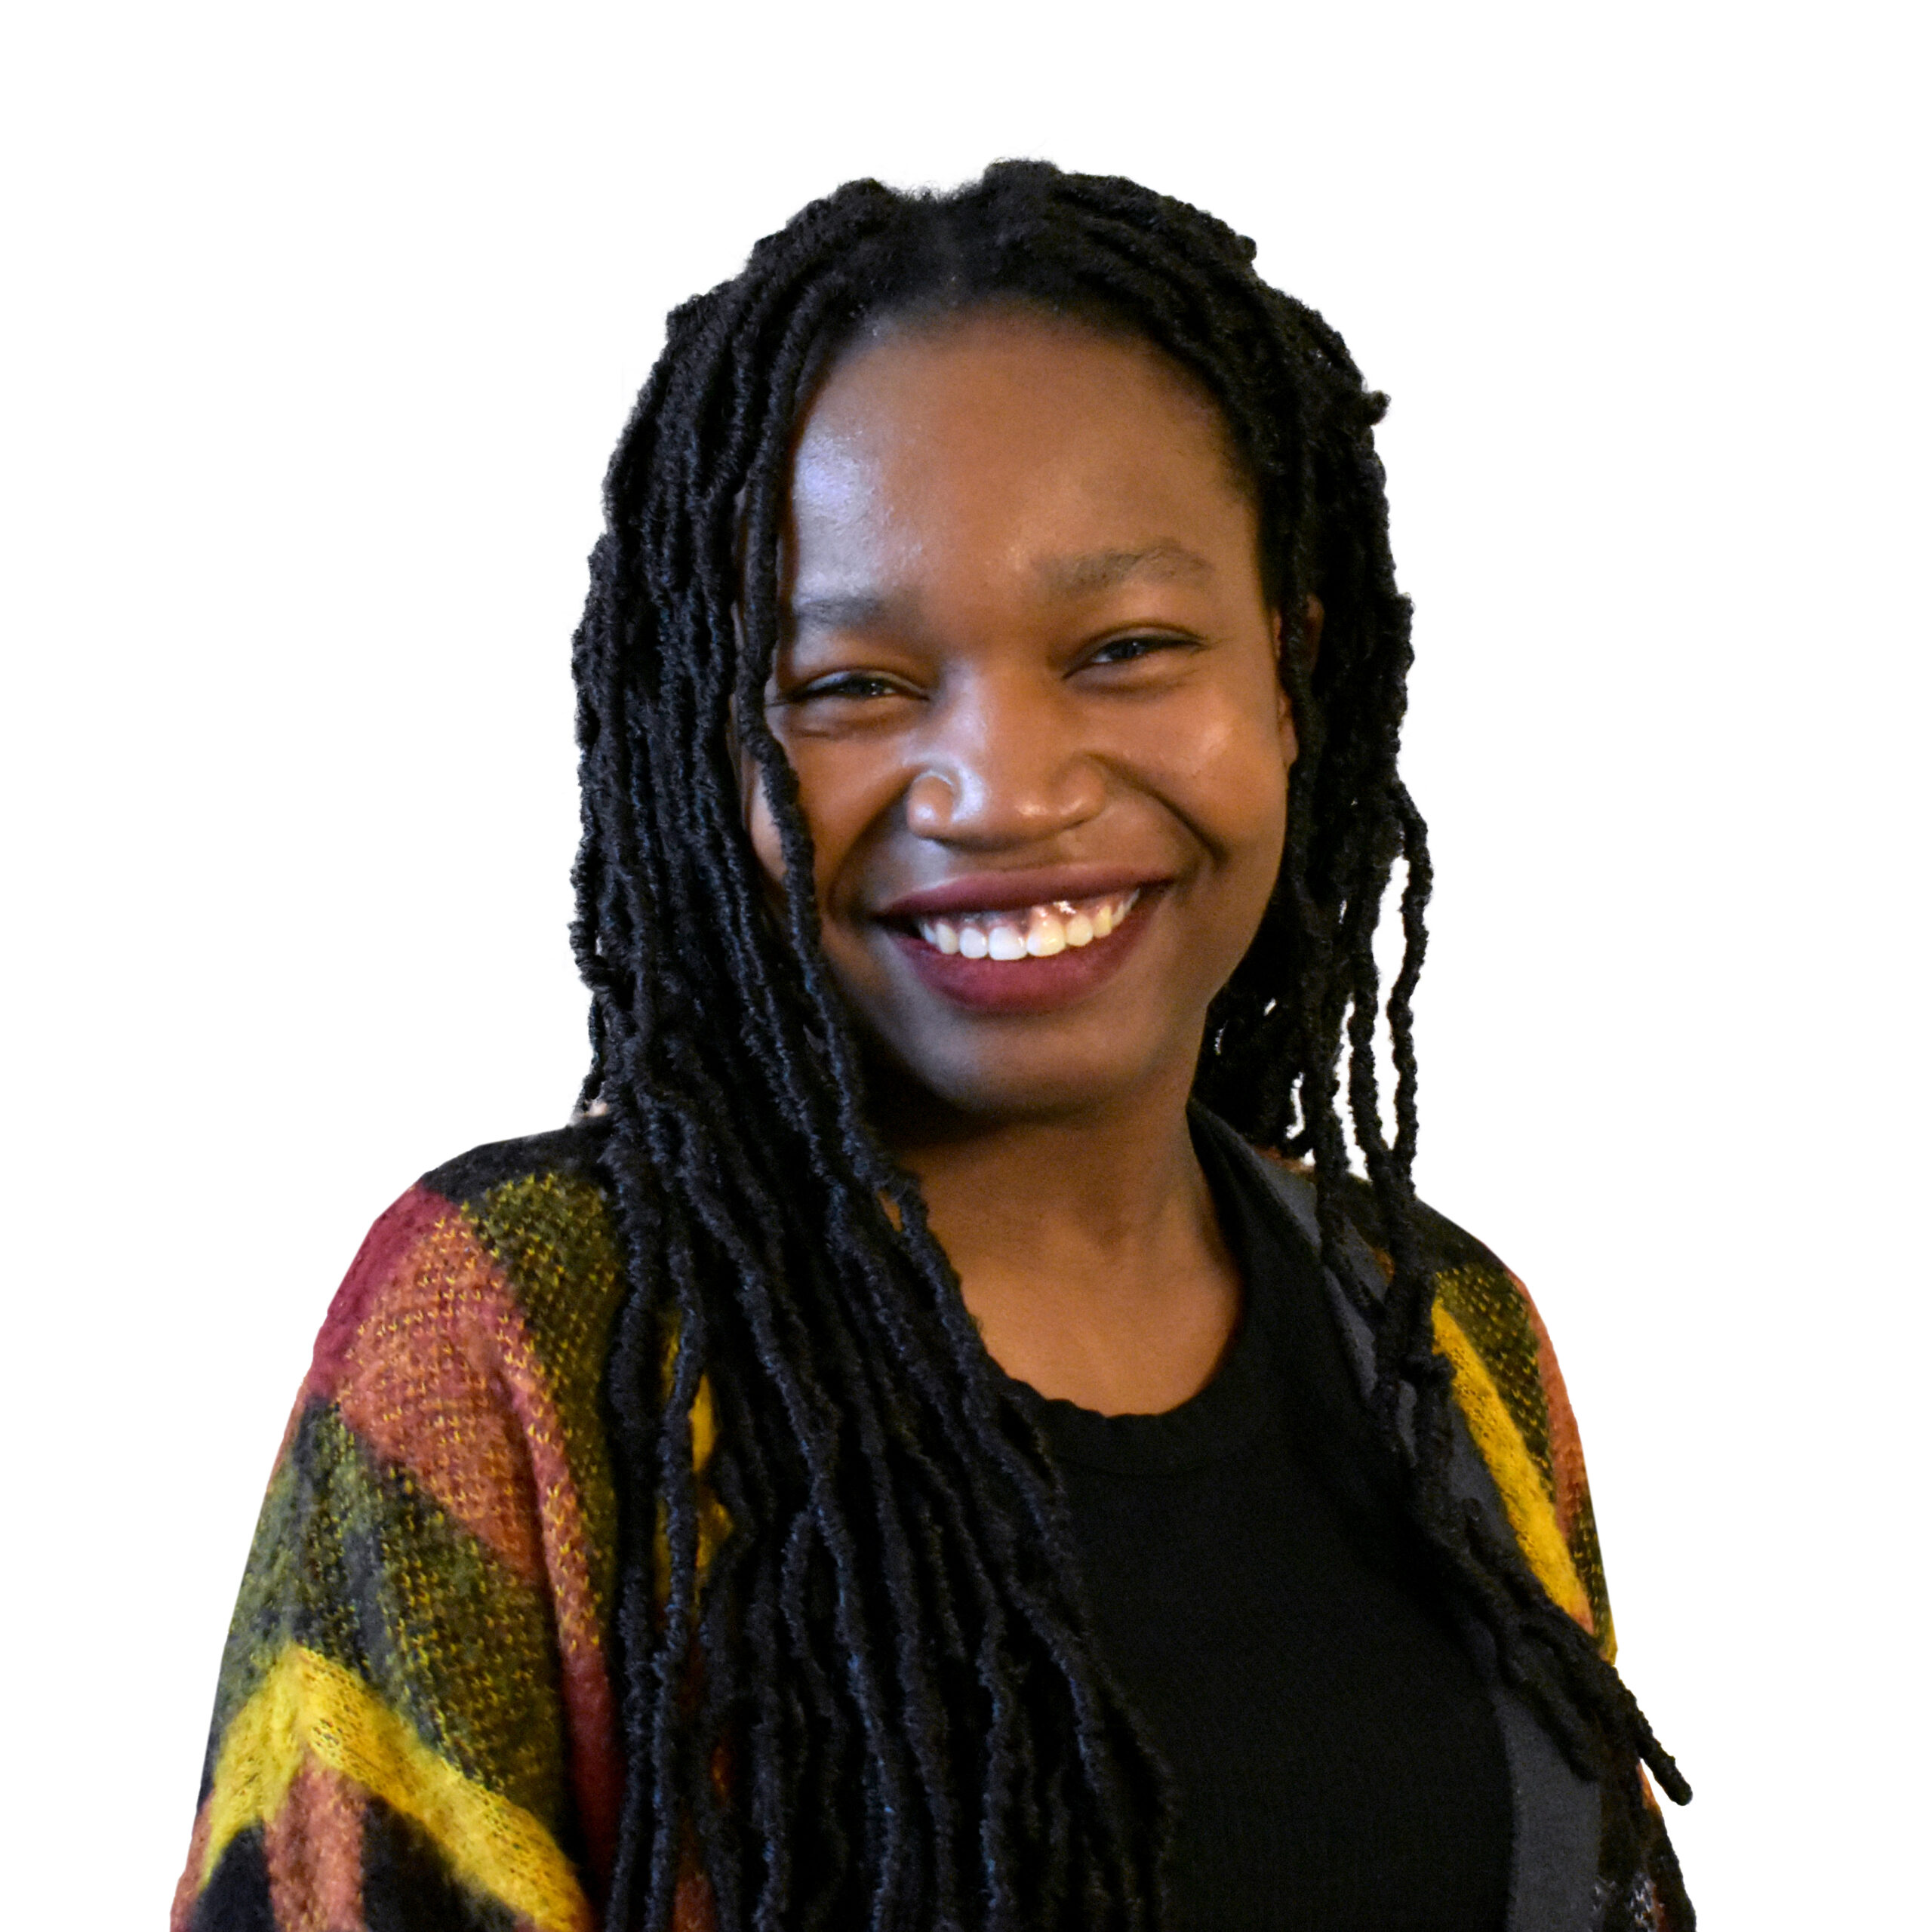 Amaka Mgboji, a young Black woman, with braids, wearing a colourful cardigan over a black tee.